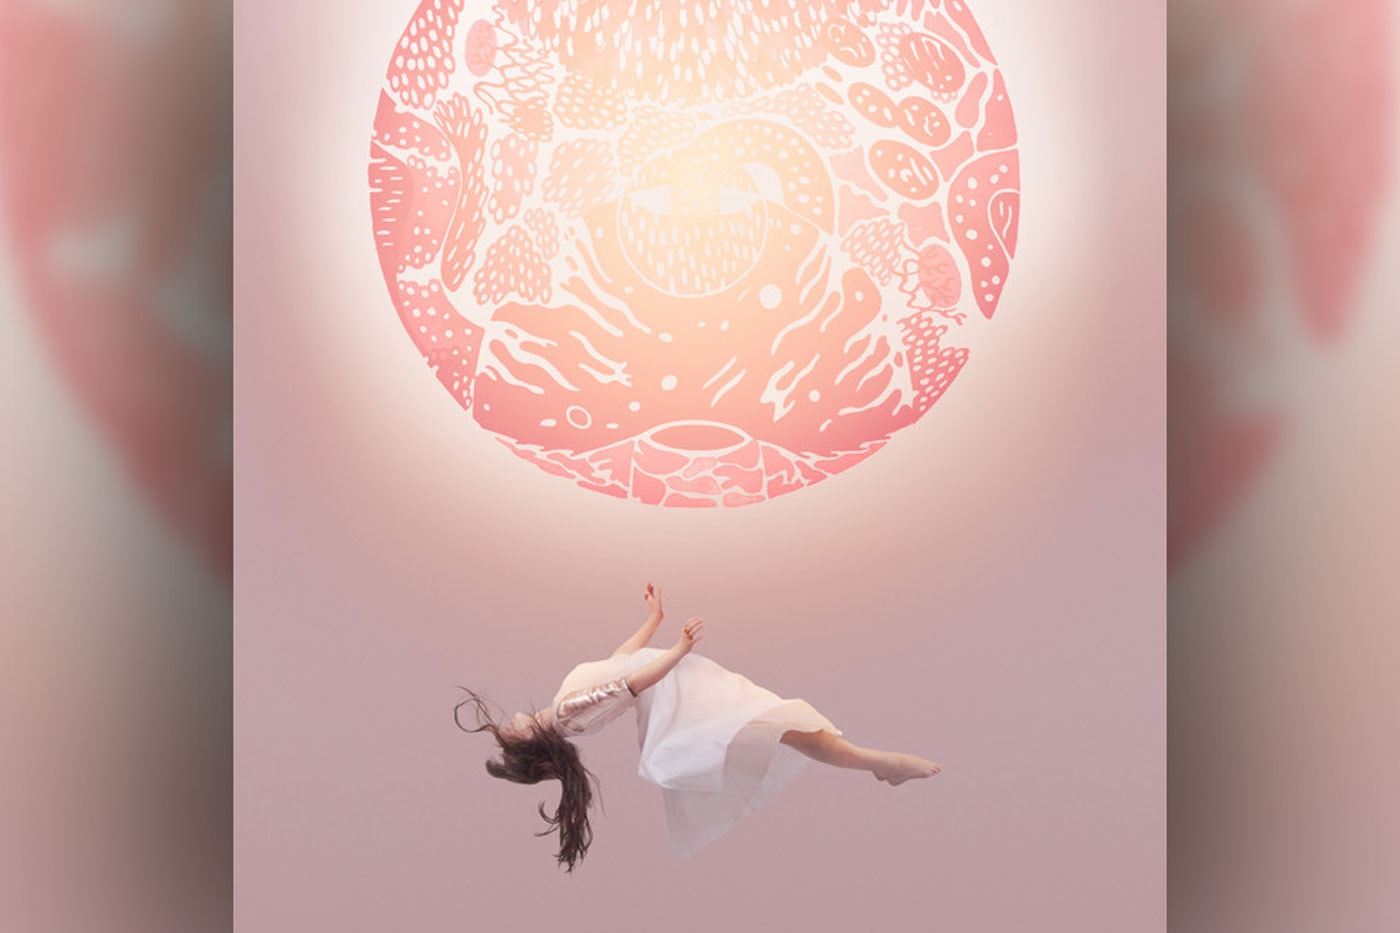 Purity Ring Release Visuals for "Begin Again"